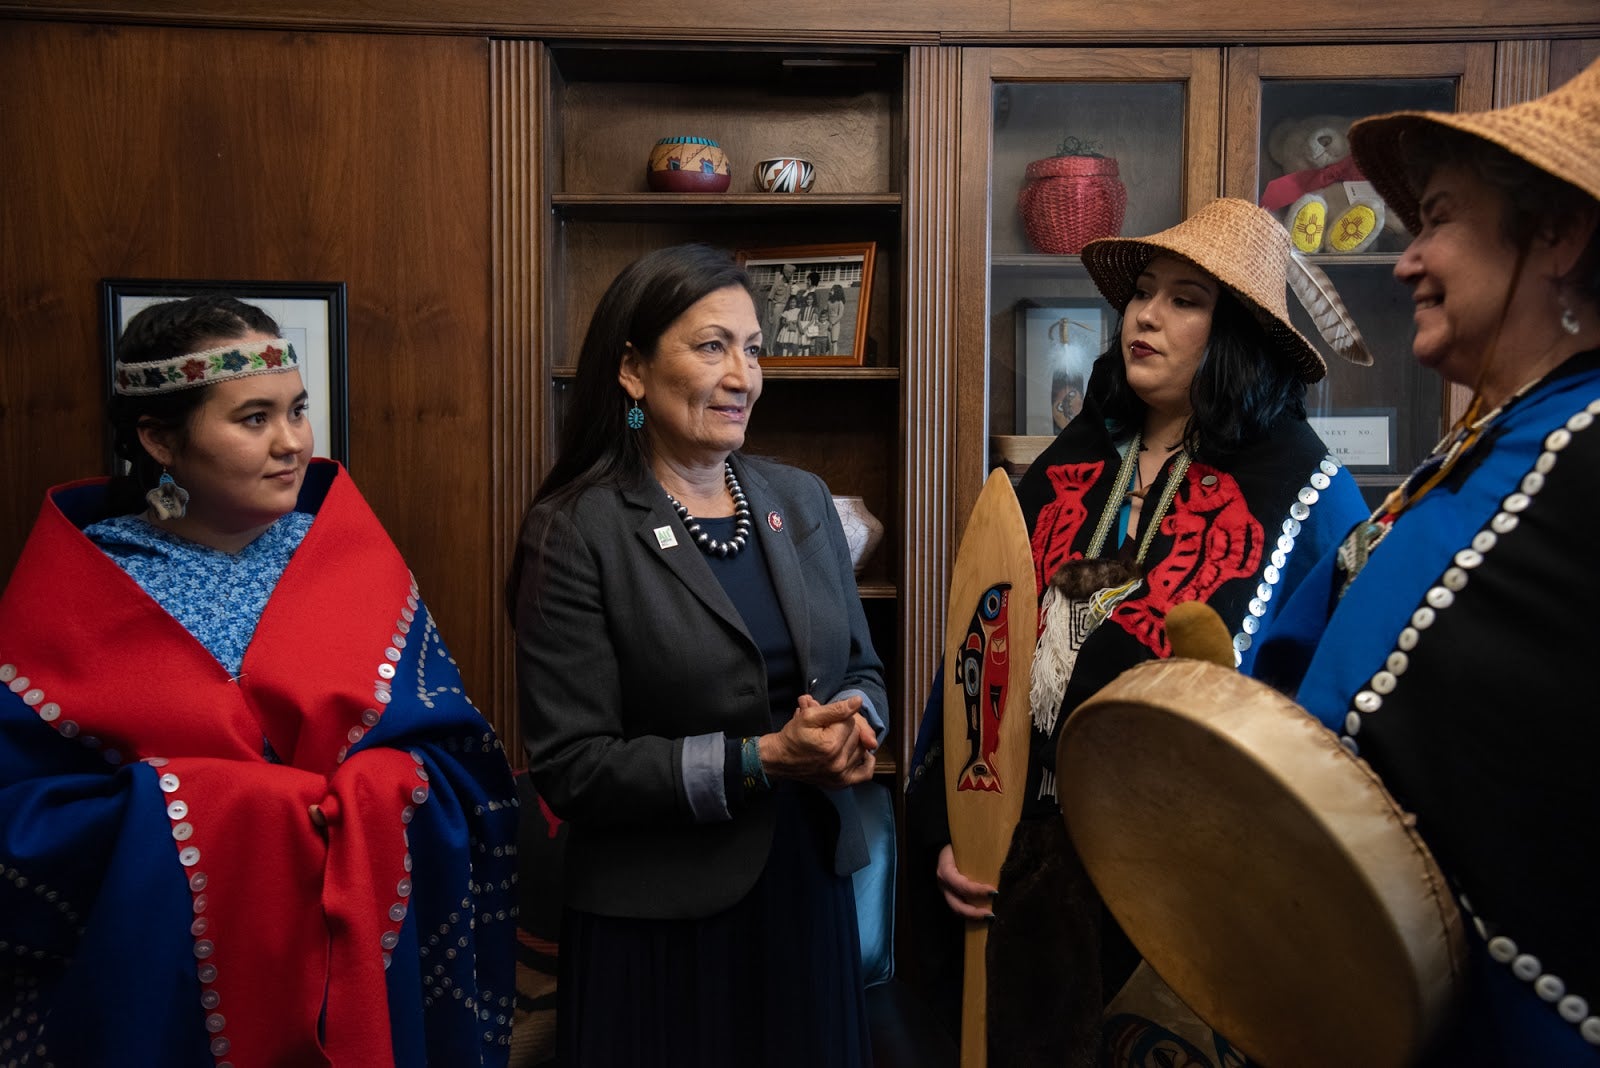 A delegation of Alaska Native women meets with New Mexico Rep. Deb Haaland, one of the first two Indigenous women ever elected to Congress.